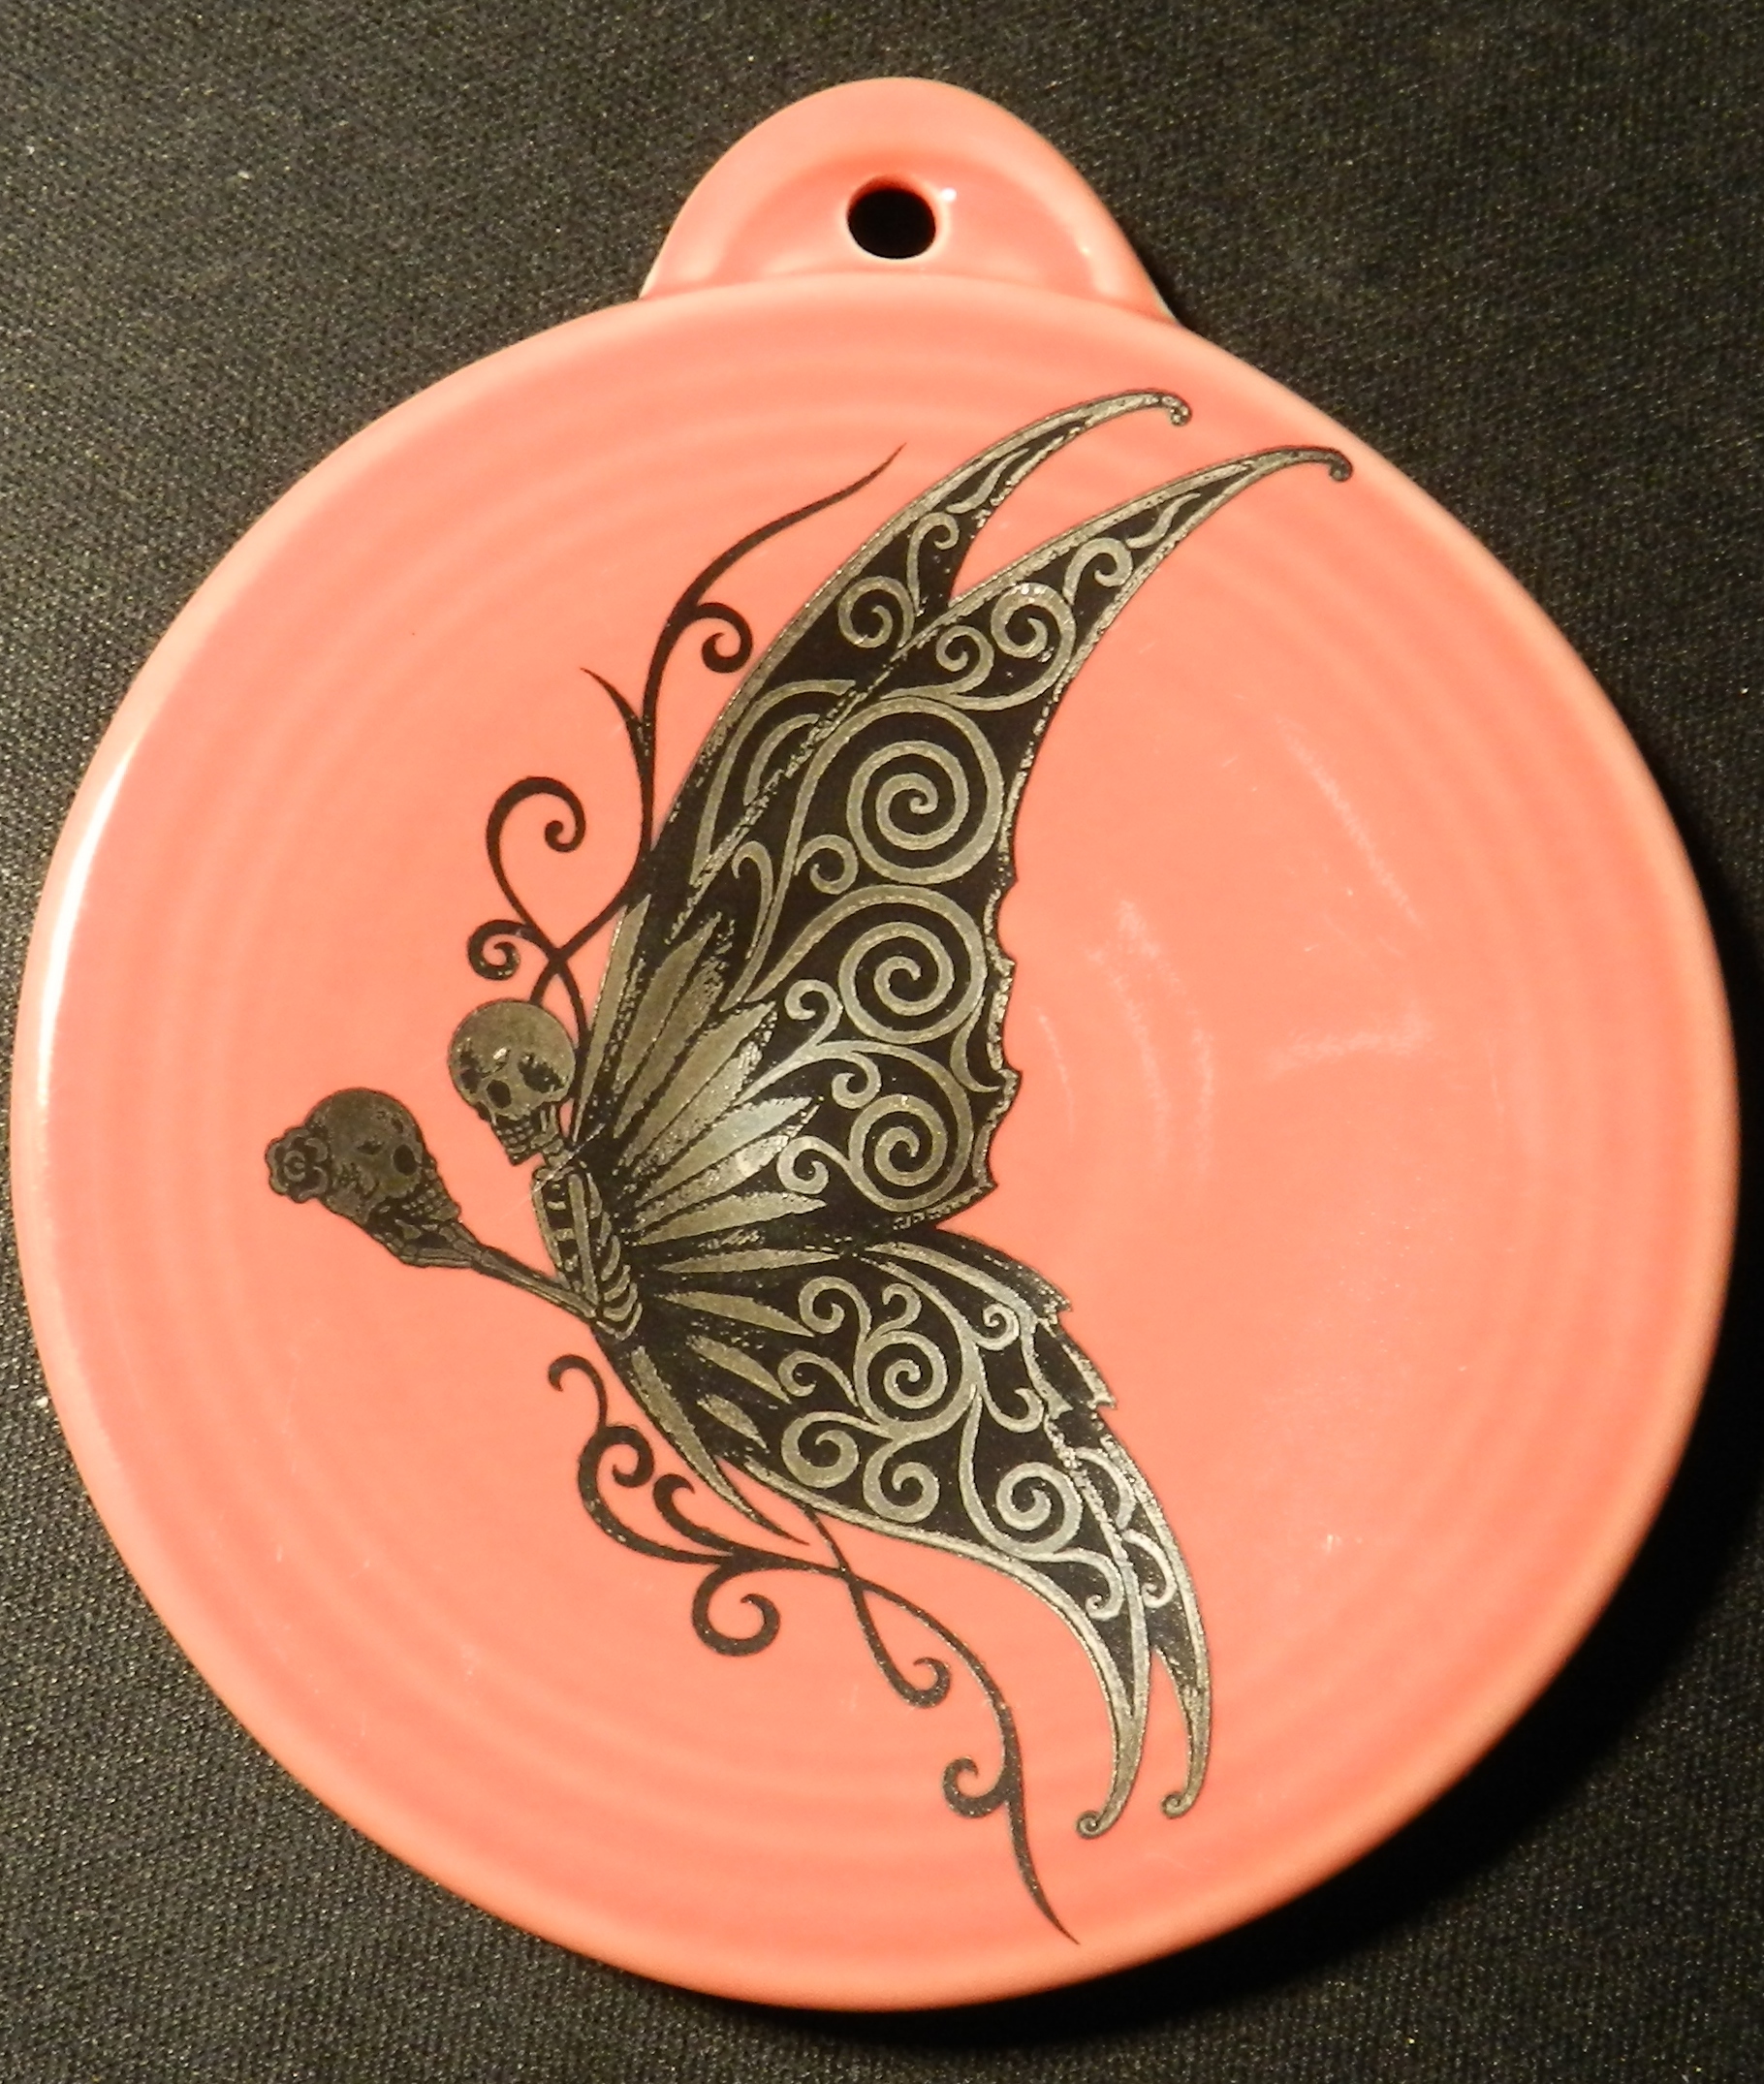 Skeleton butterfly fired on pottery ornament and made in the USA